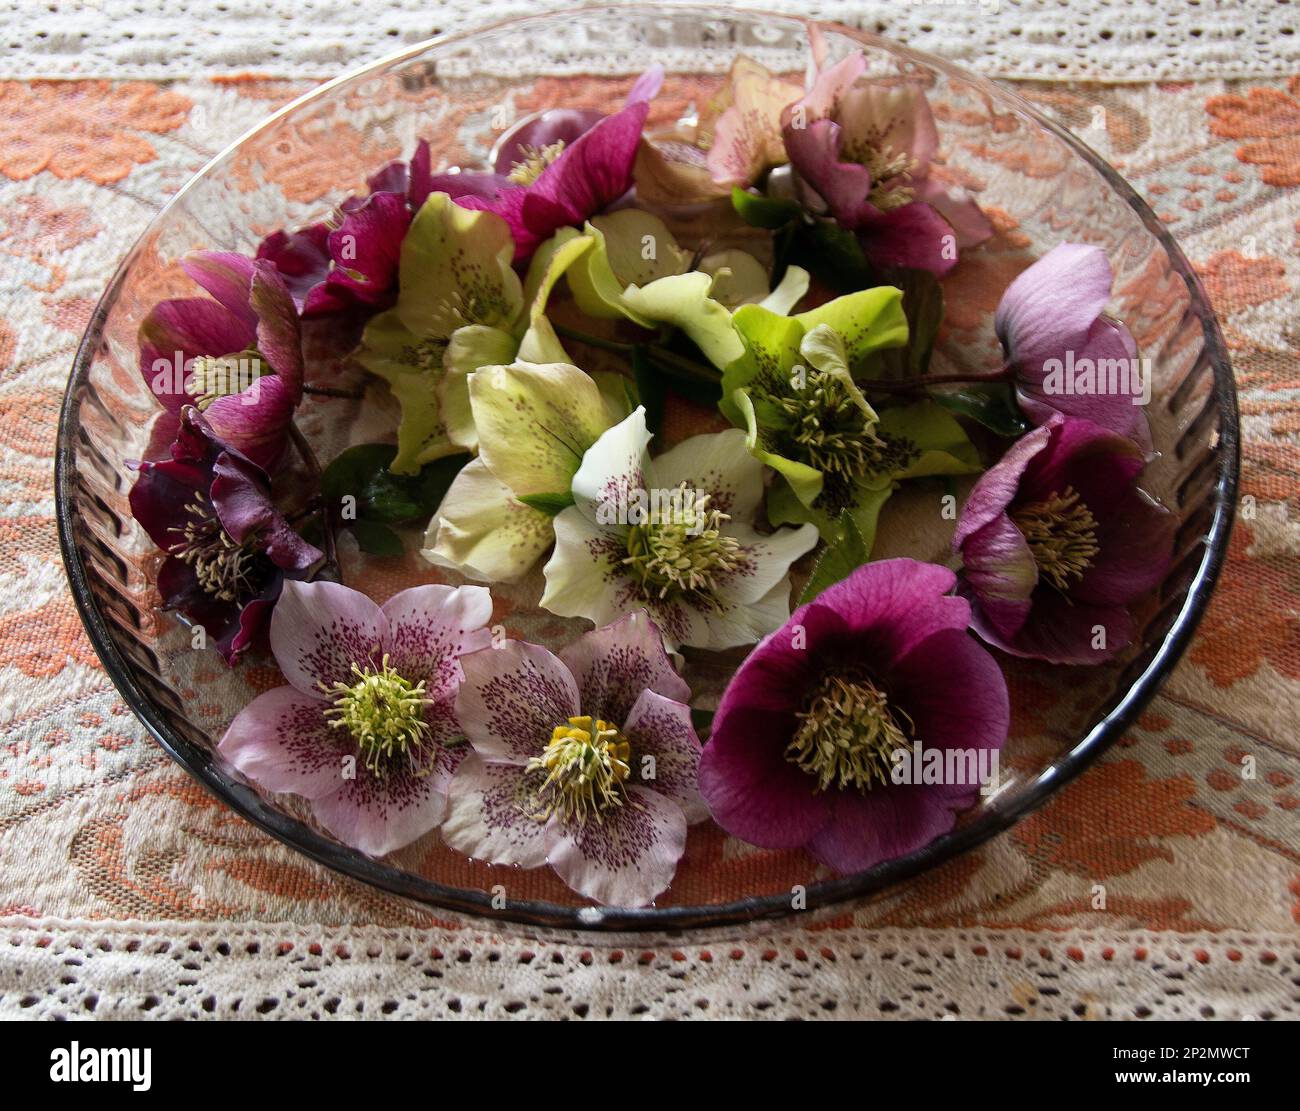 Mixed hellebore flower-heads make an attractive table arrangement with tones of white, cream, pale green, pale pink and magenta, some with dashes of m Stock Photo